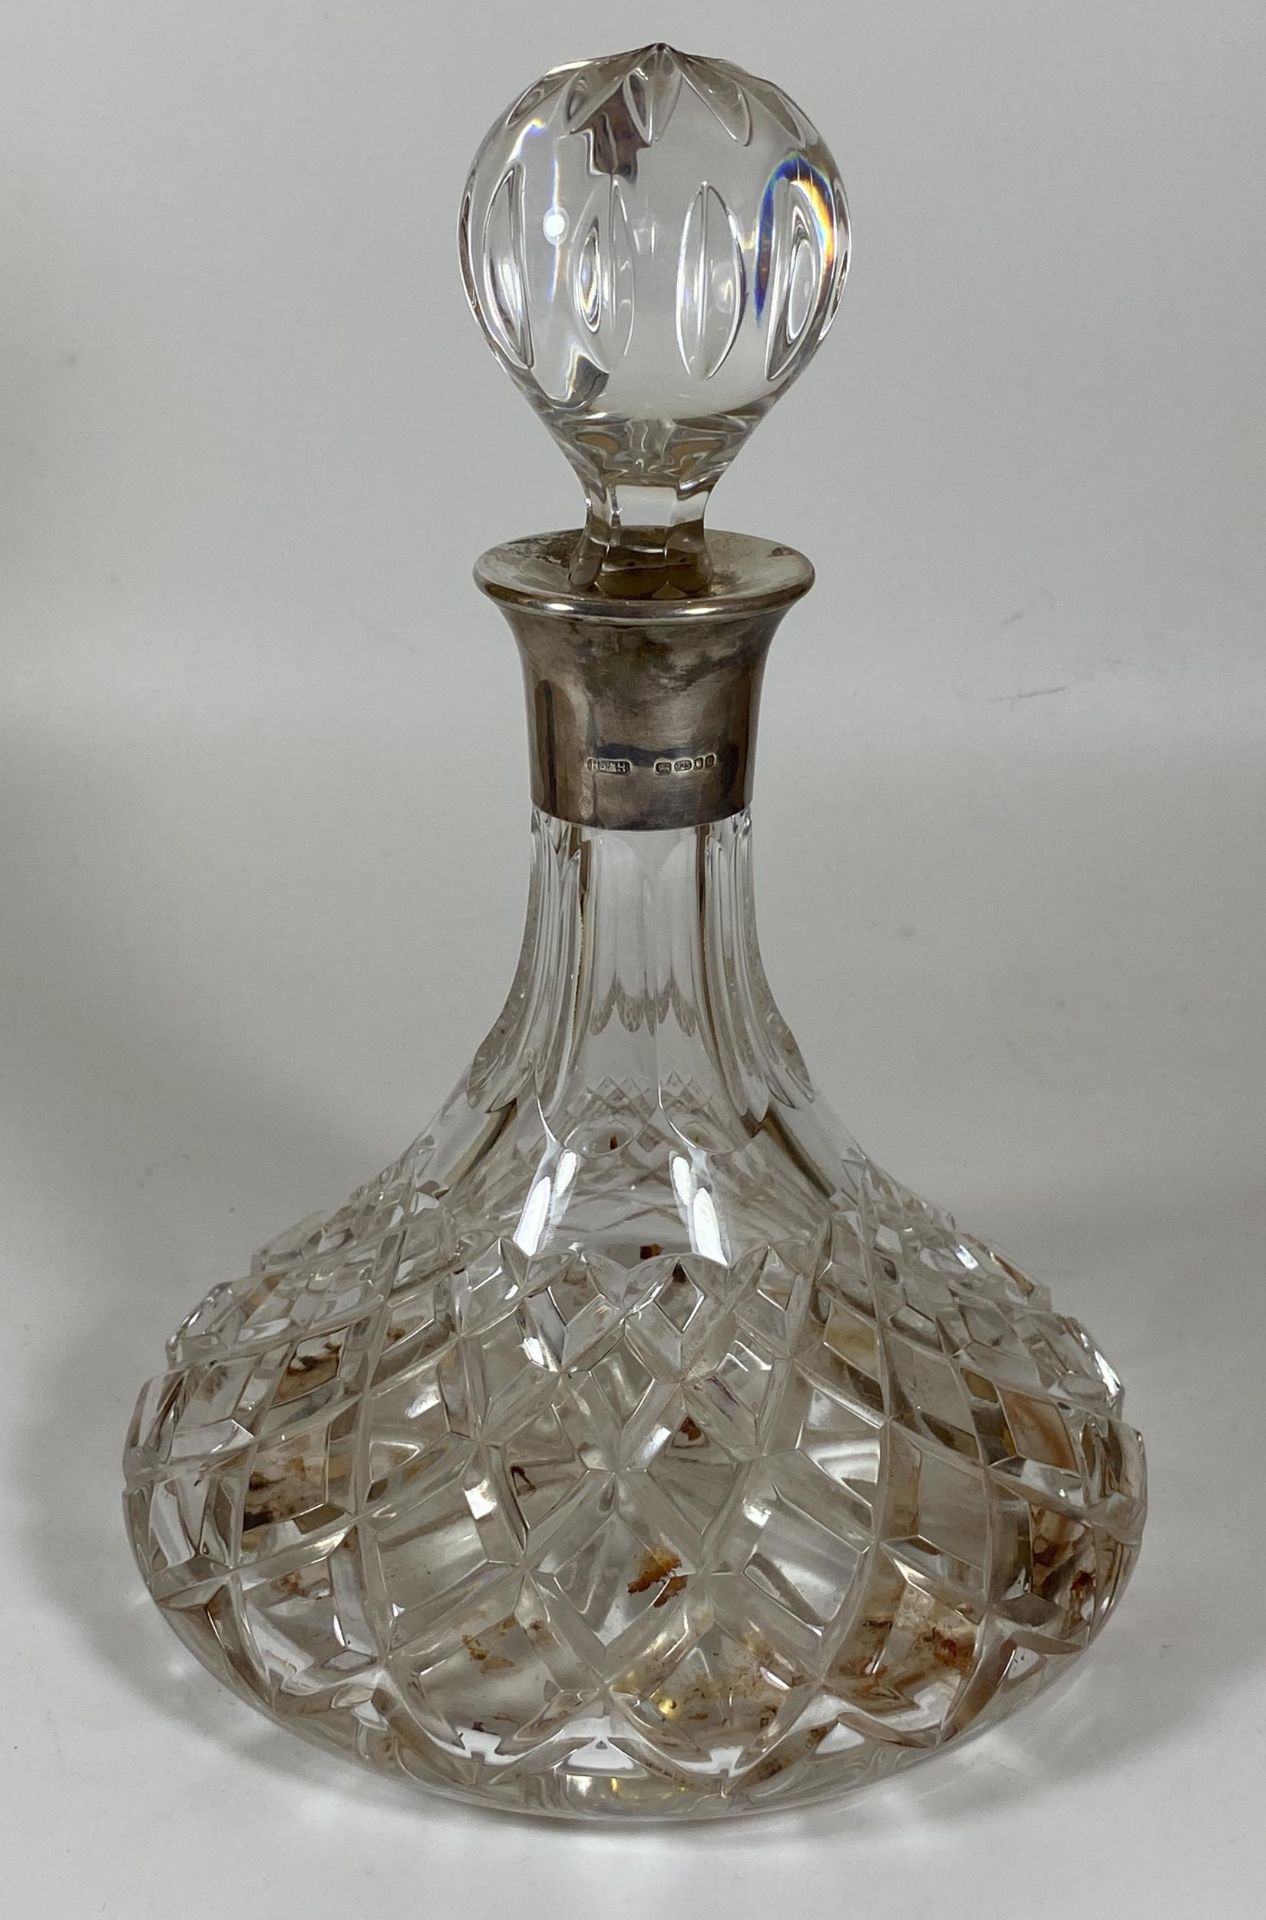 A CUT GLASS SHIPS DECANTER WITH HALLMARKED SILVER COLLAR, HALLMARKS FOR LONDON, 2002, MAKERS